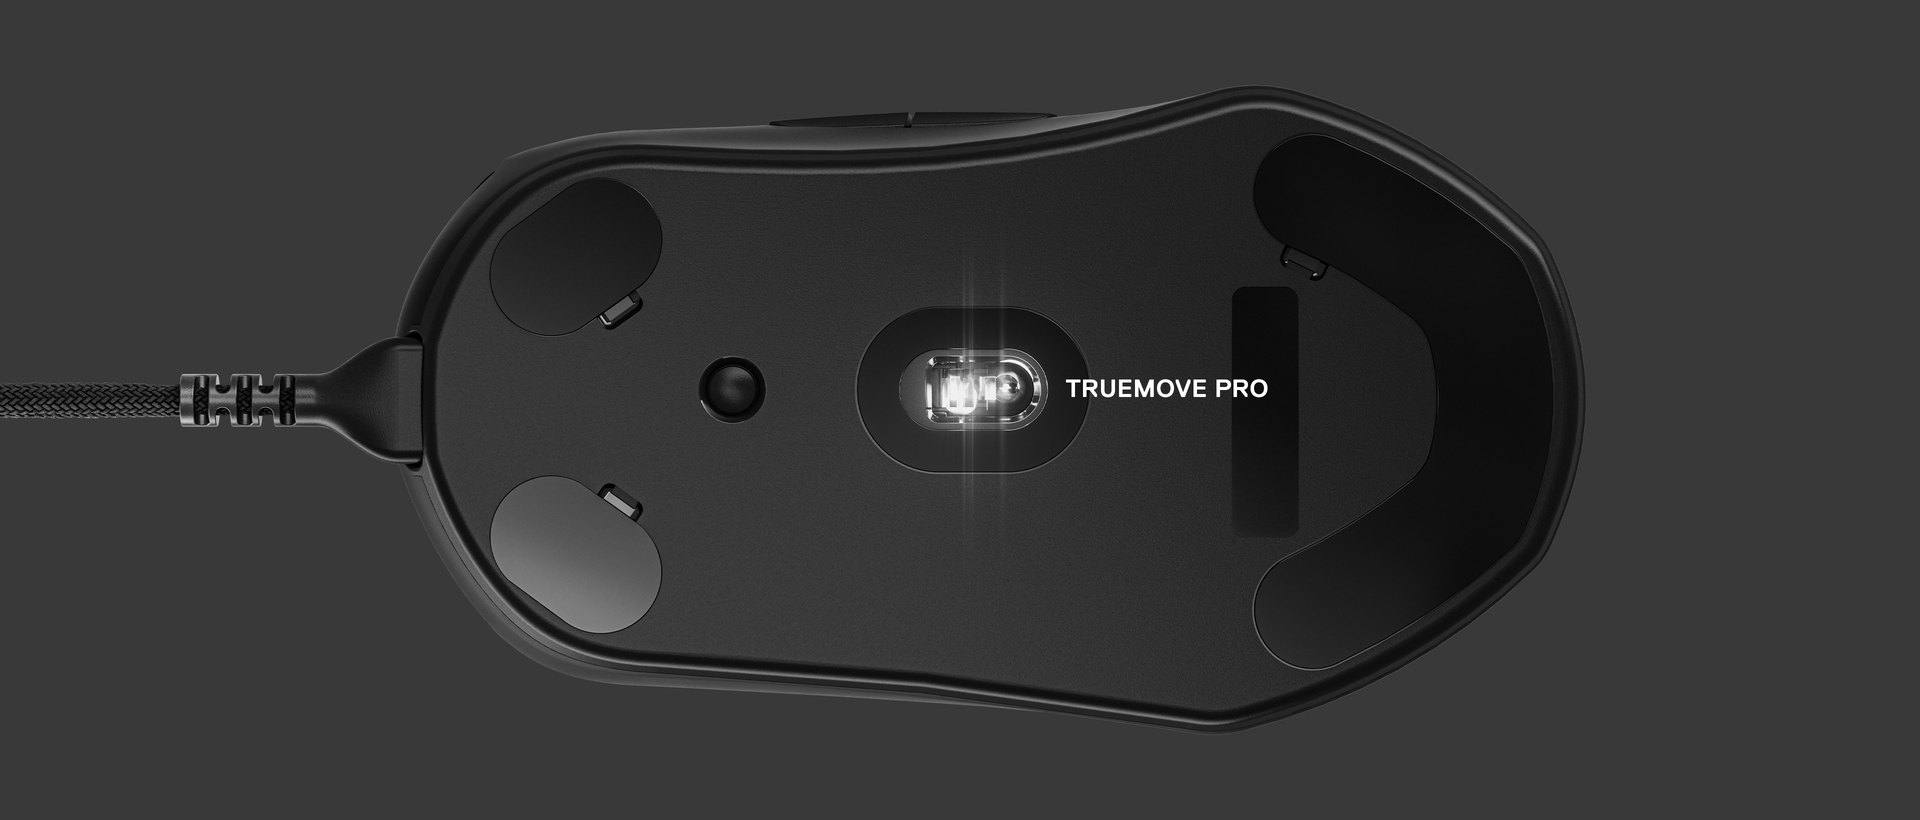 An underside look at the mouse with a label identifying the sensor. Text right: TrueMove Pro.